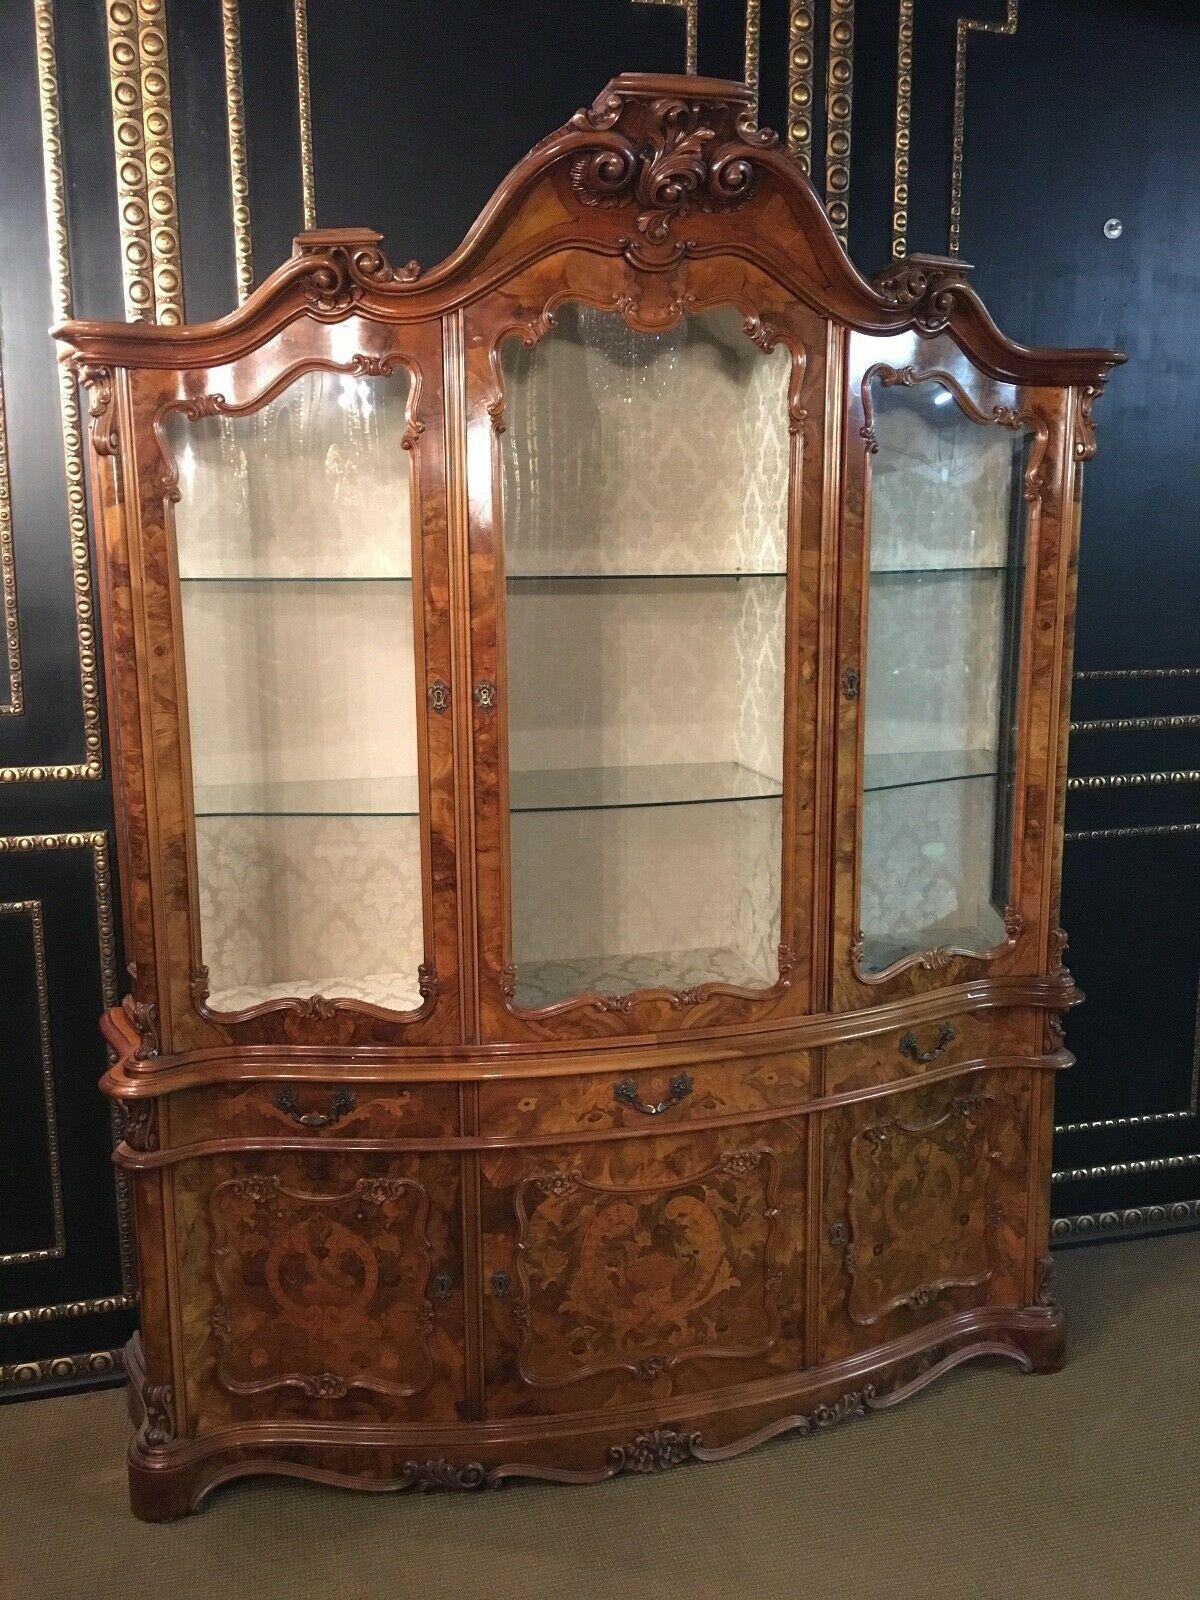 Unique cupboard in the style of the 18th century made of root wood with floral inlays in an absolutely 